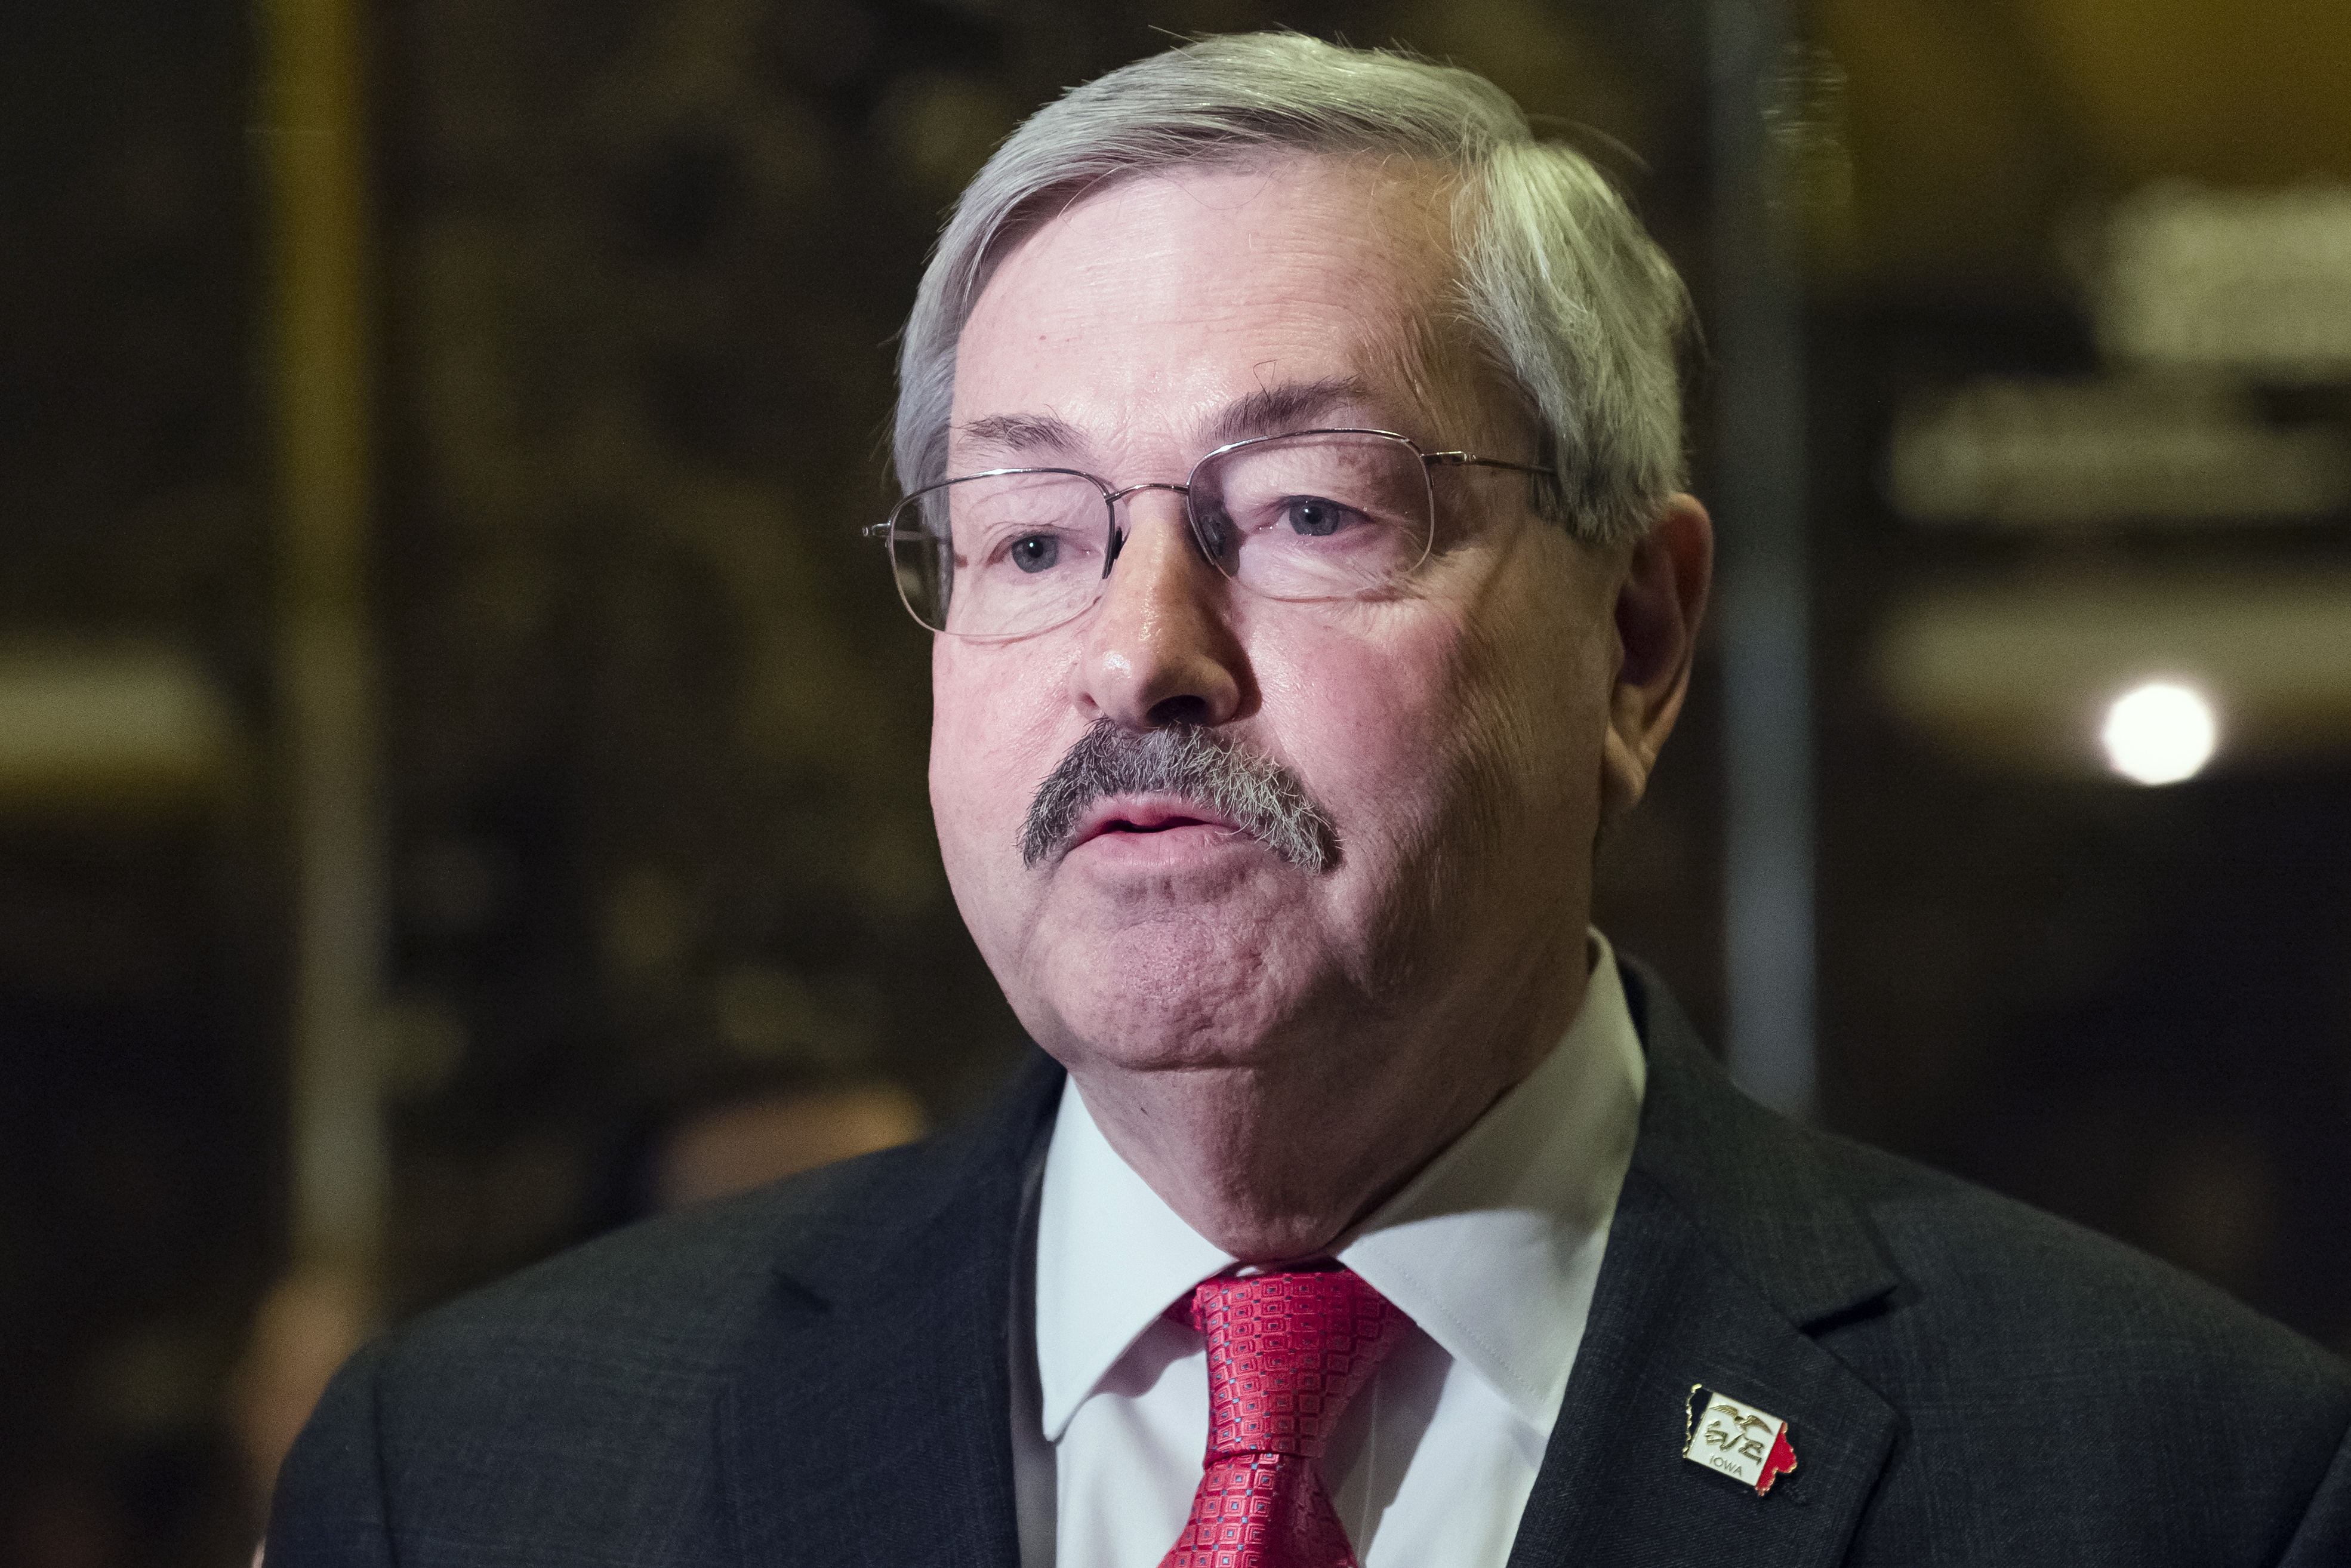 Terry Branstad, then governor of Iowa, speaks to members of the media in the lobby at Trump Tower in New York, U.S., on Tuesday, Dec. 6, 2016. (Albin Lohr-Jones/Pool via Bloomberg via Getty Images)